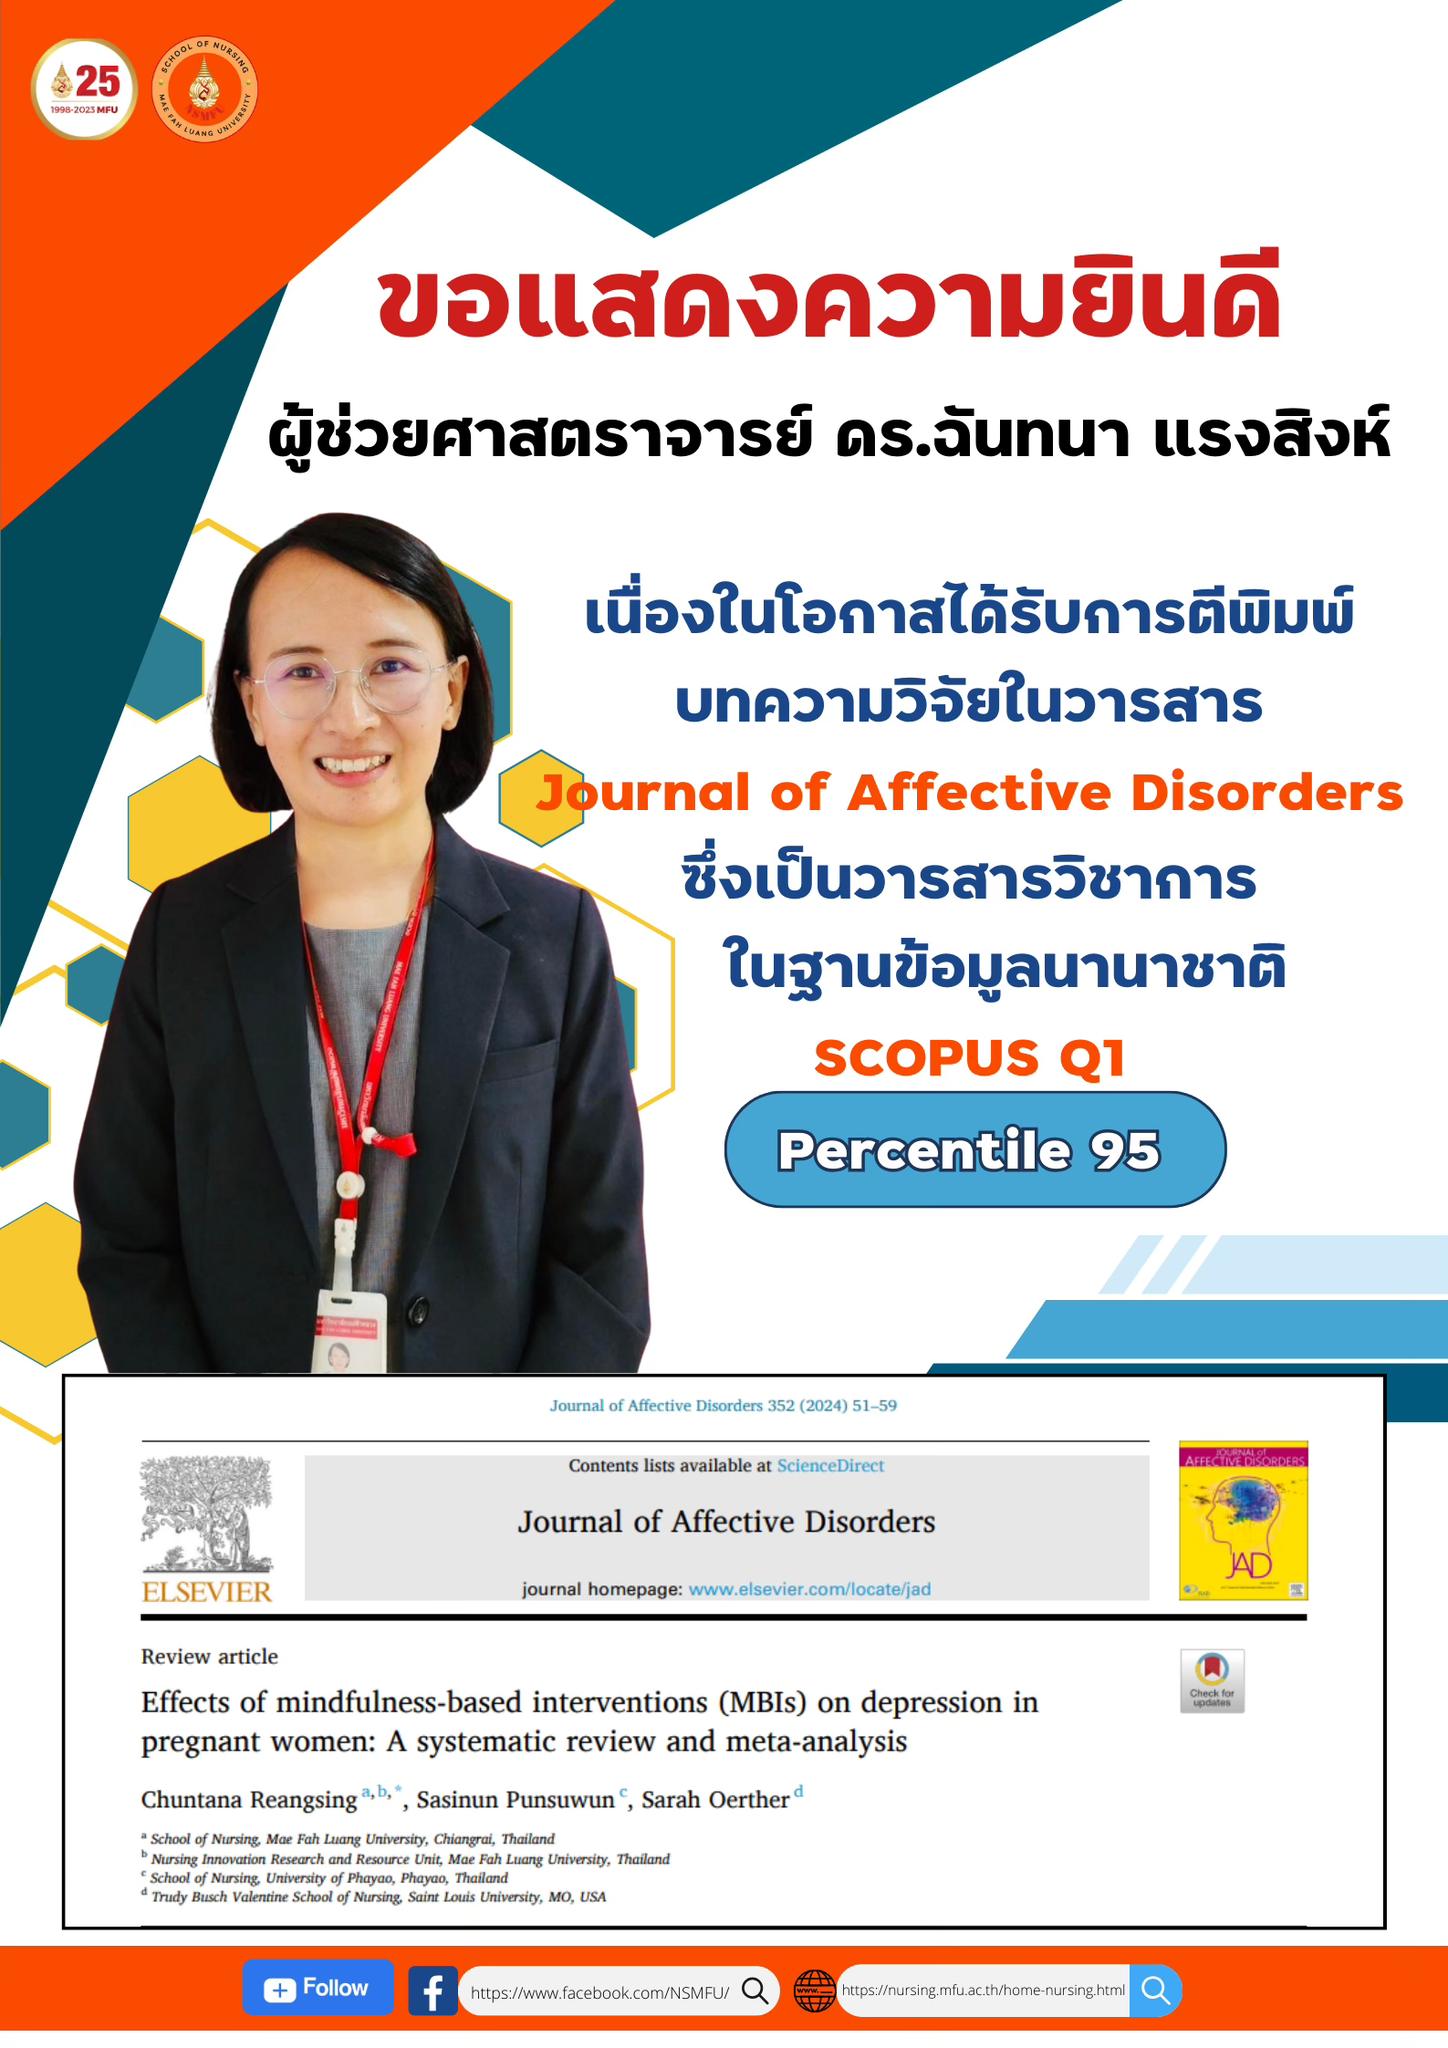 Congratulations to Asst. Prof. Dr. Chuntana Reangsing on the publication of her research  in the Journal of Affective Disorders, a SCOPUS Q1 International Journal, percentile 95. 